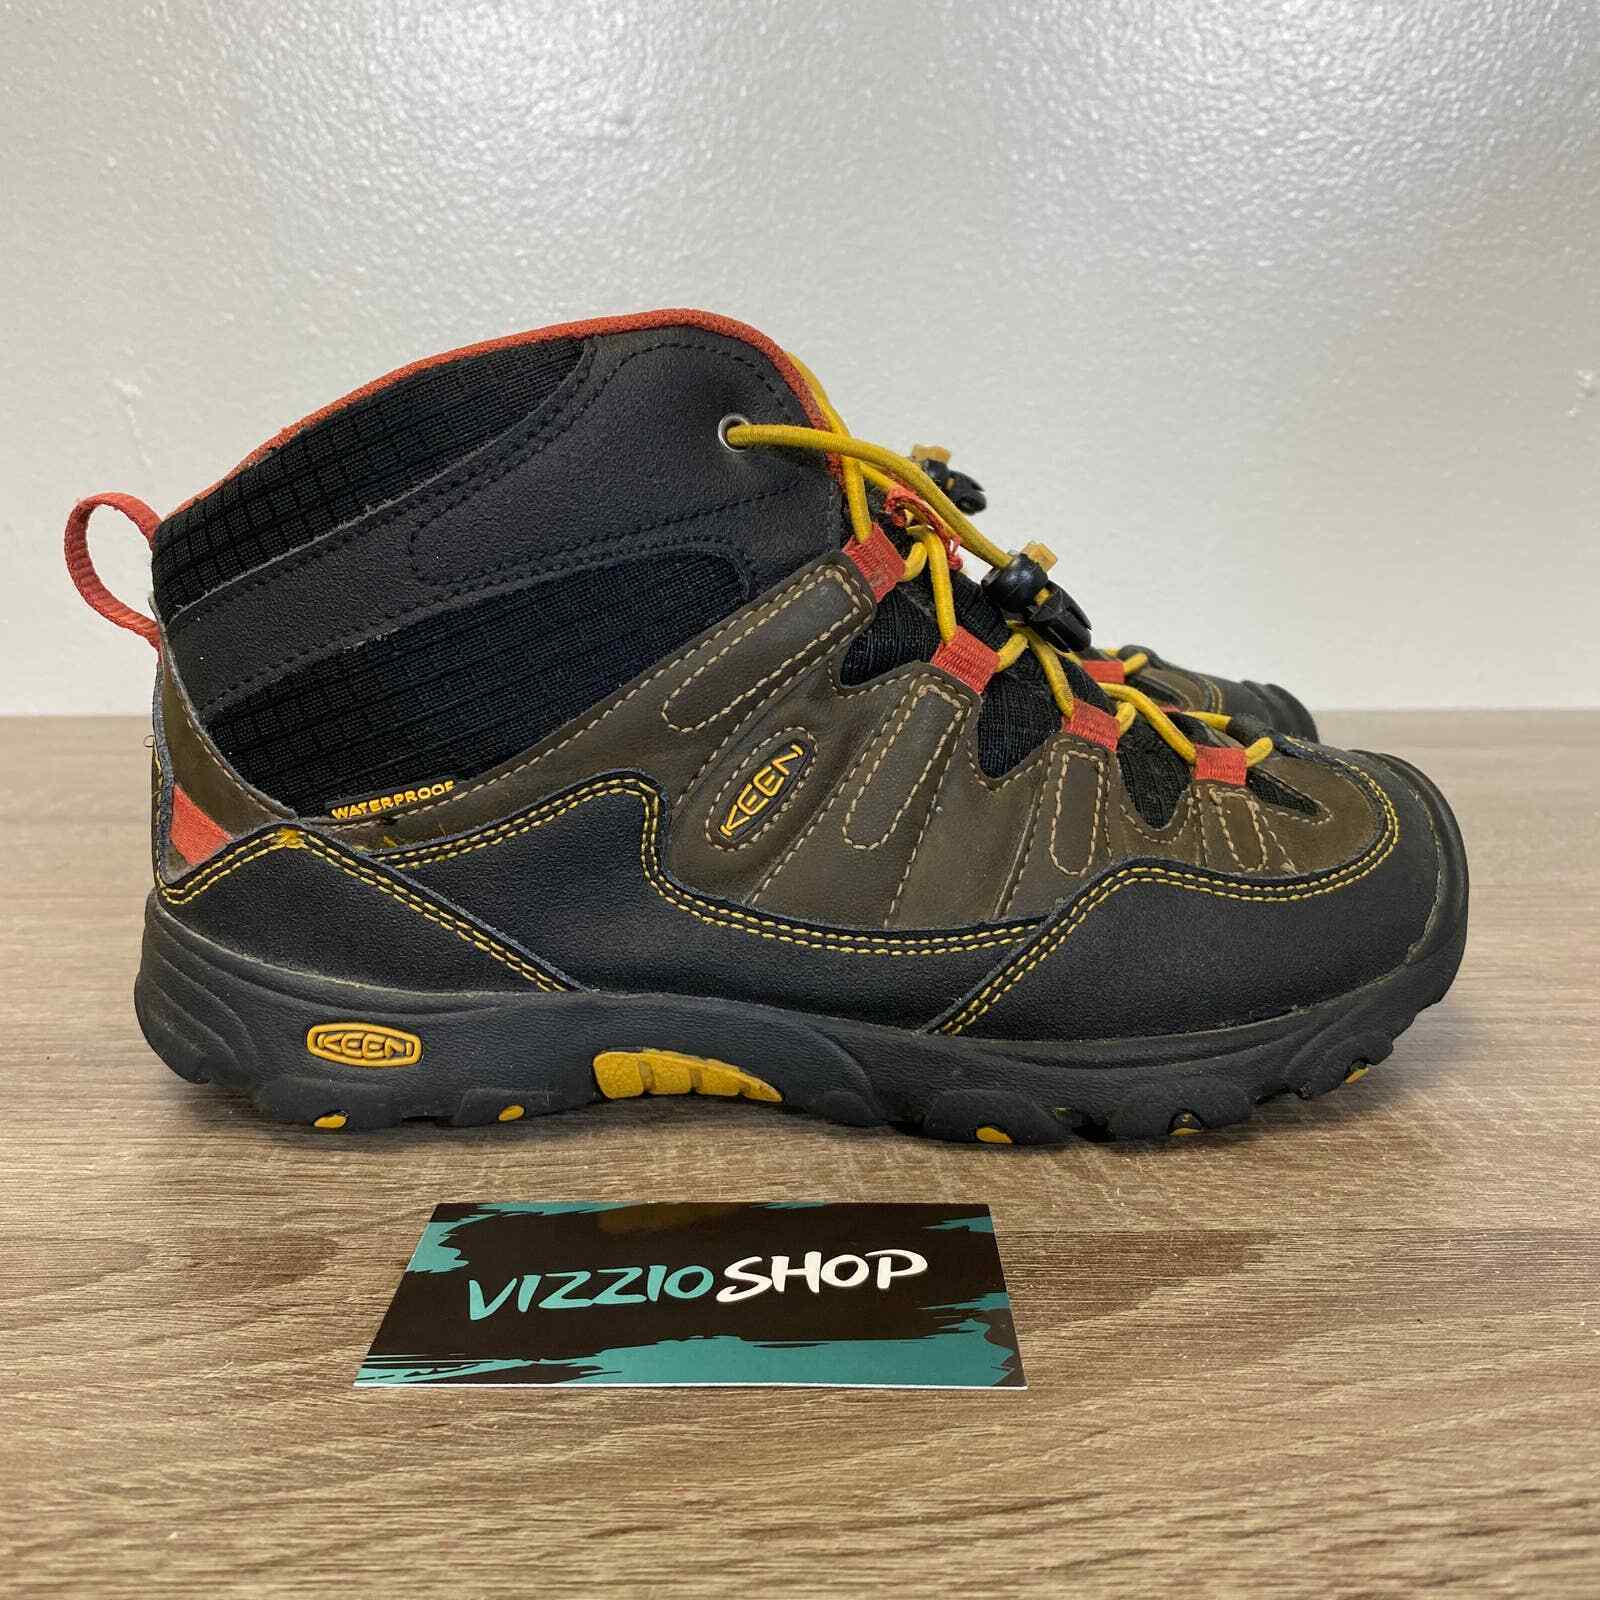 Keen - Pagosa Mid WaterProof Brown Yellow Hiking Boots - Youth 5 - 1011745